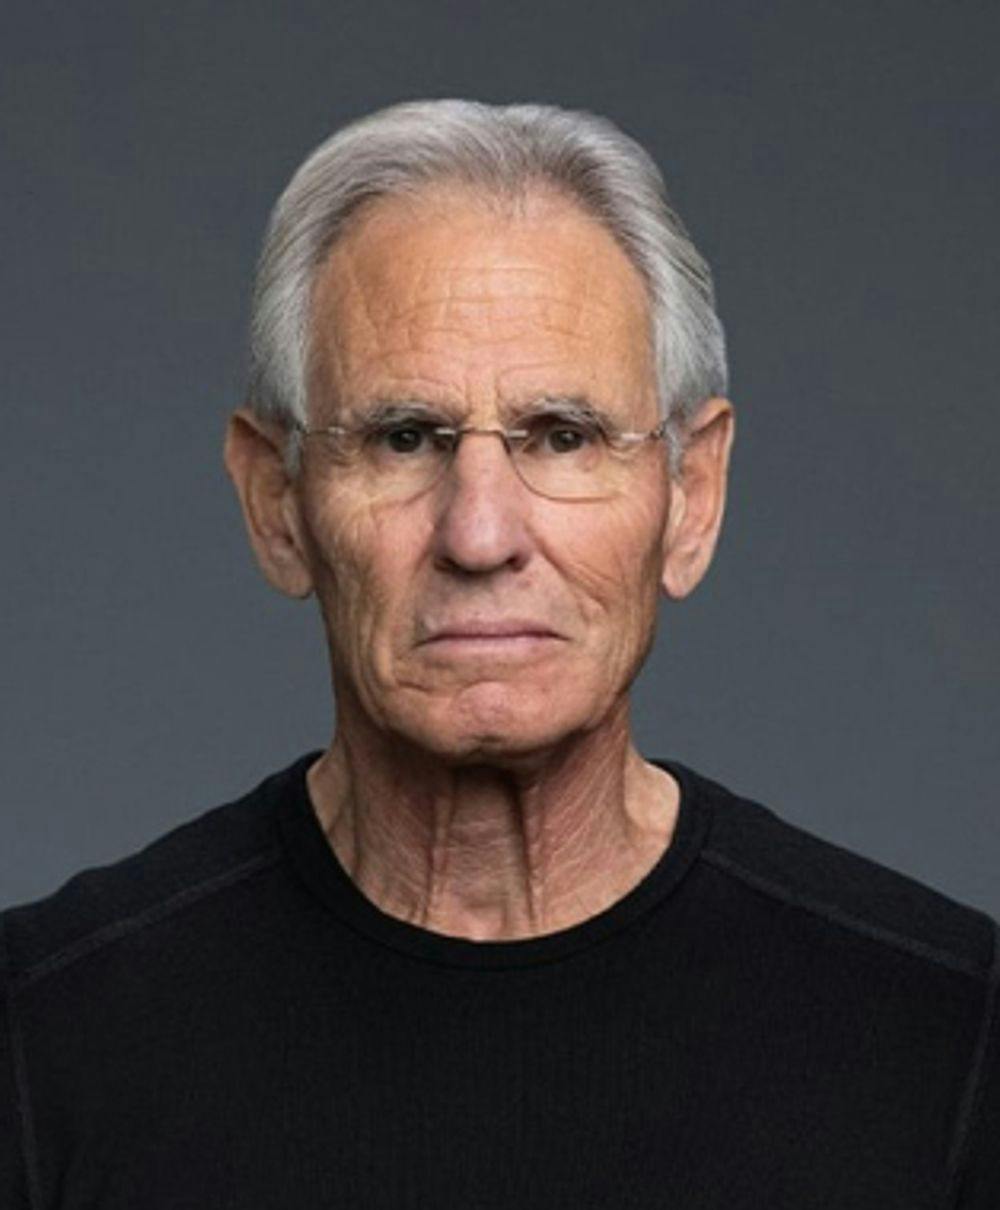 Jon Kabat-Zinn - Jon Kabat-Zinn is an American professor emeritus of medicine and the creator of the Stress Reduction Clinic and the Center for Mindfulness in Medicine.